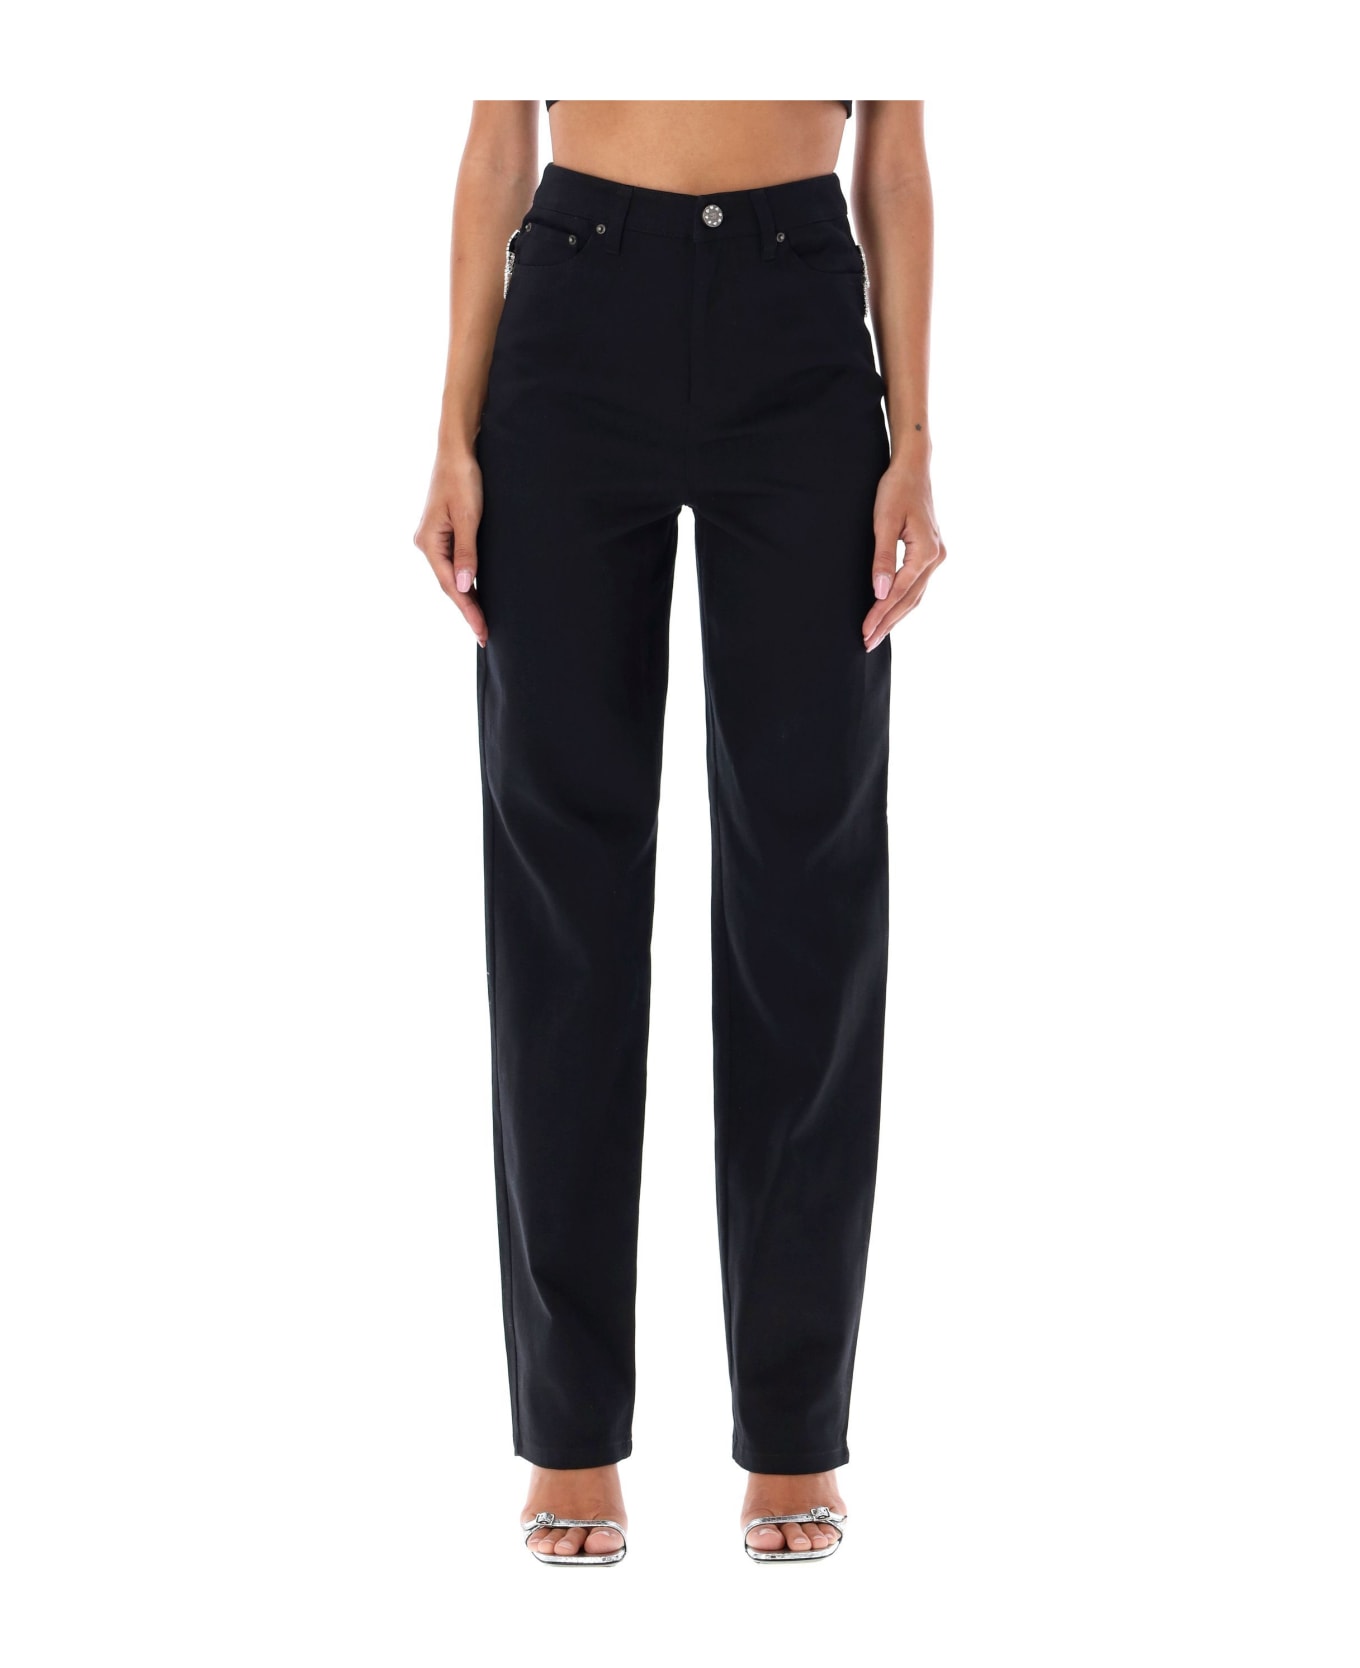 Rotate by Birger Christensen Twill High Rise Jeans - BLACK